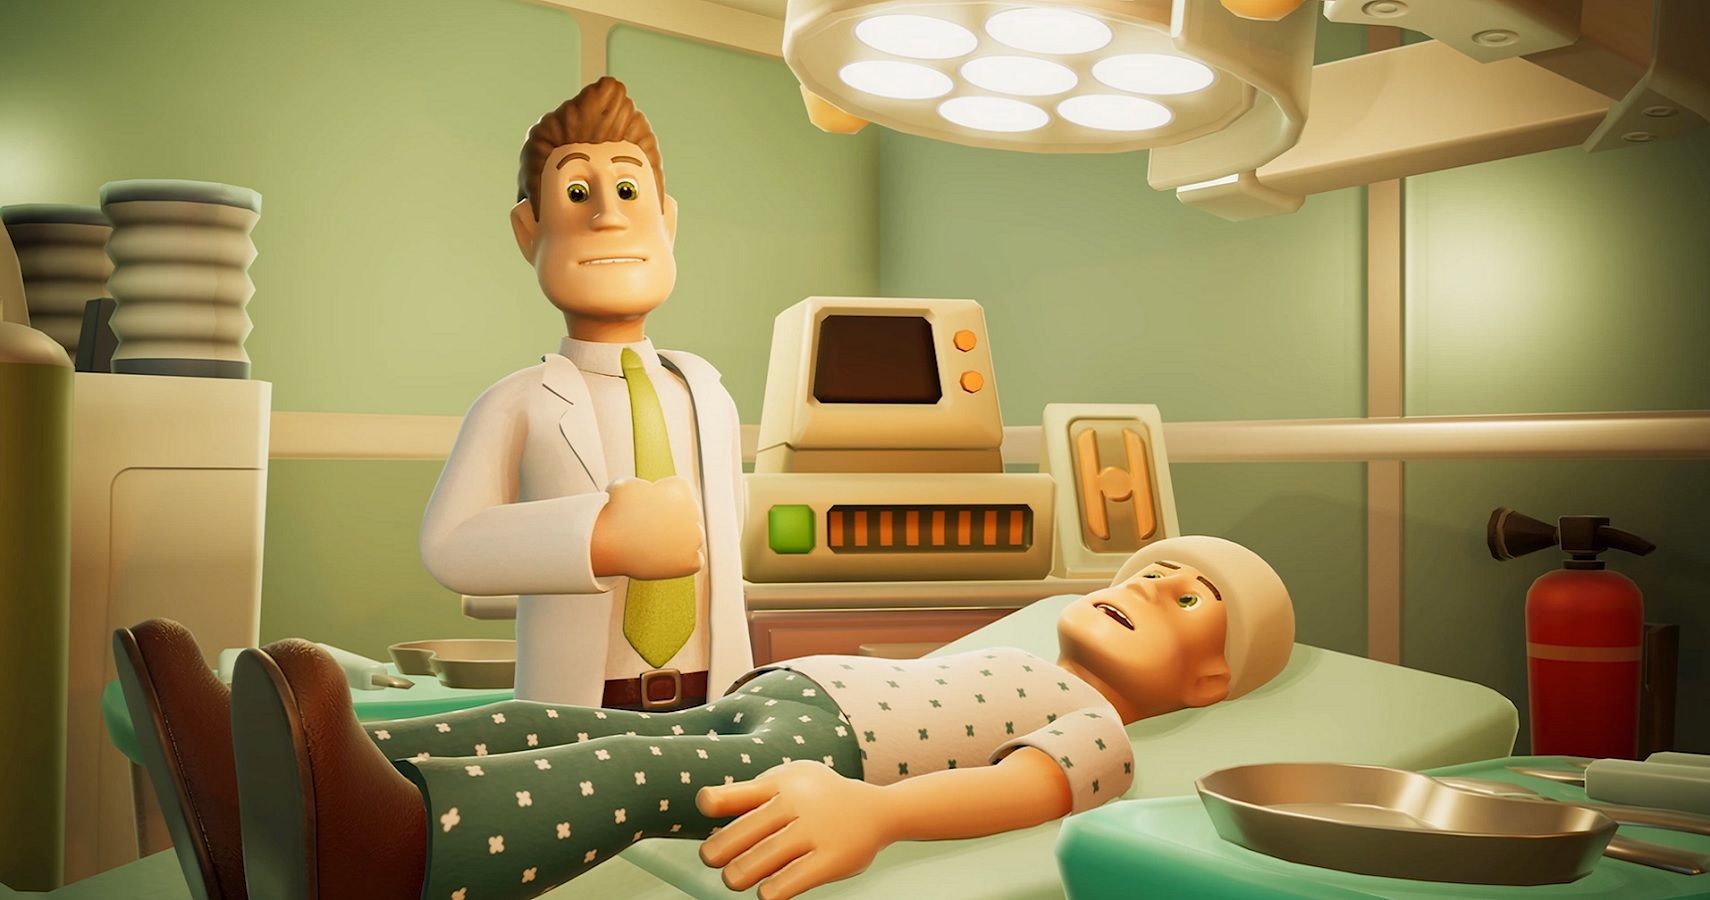 steam two point hospital download